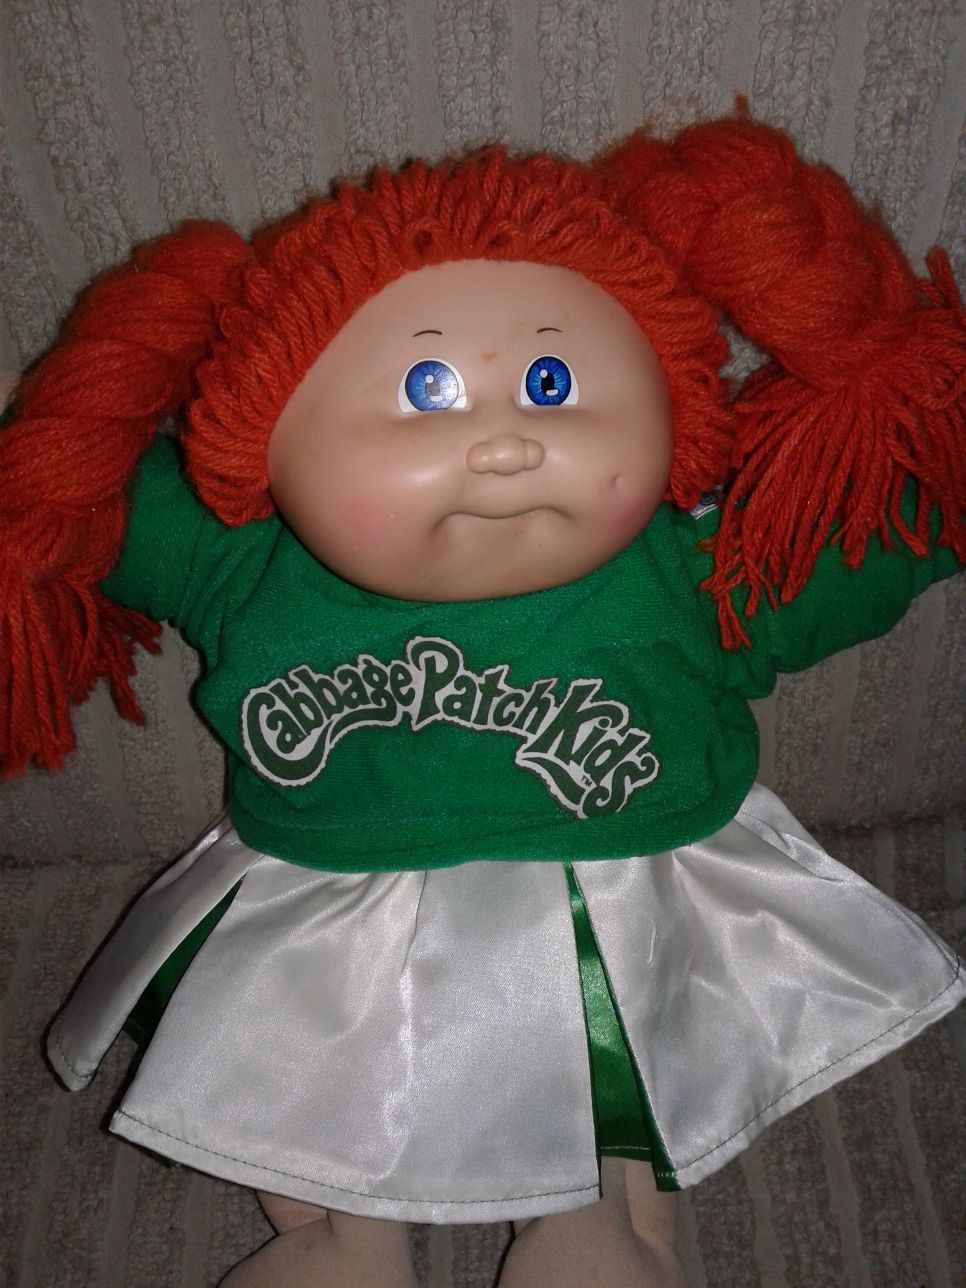 Vintage 1978 Cabbage Patch doll